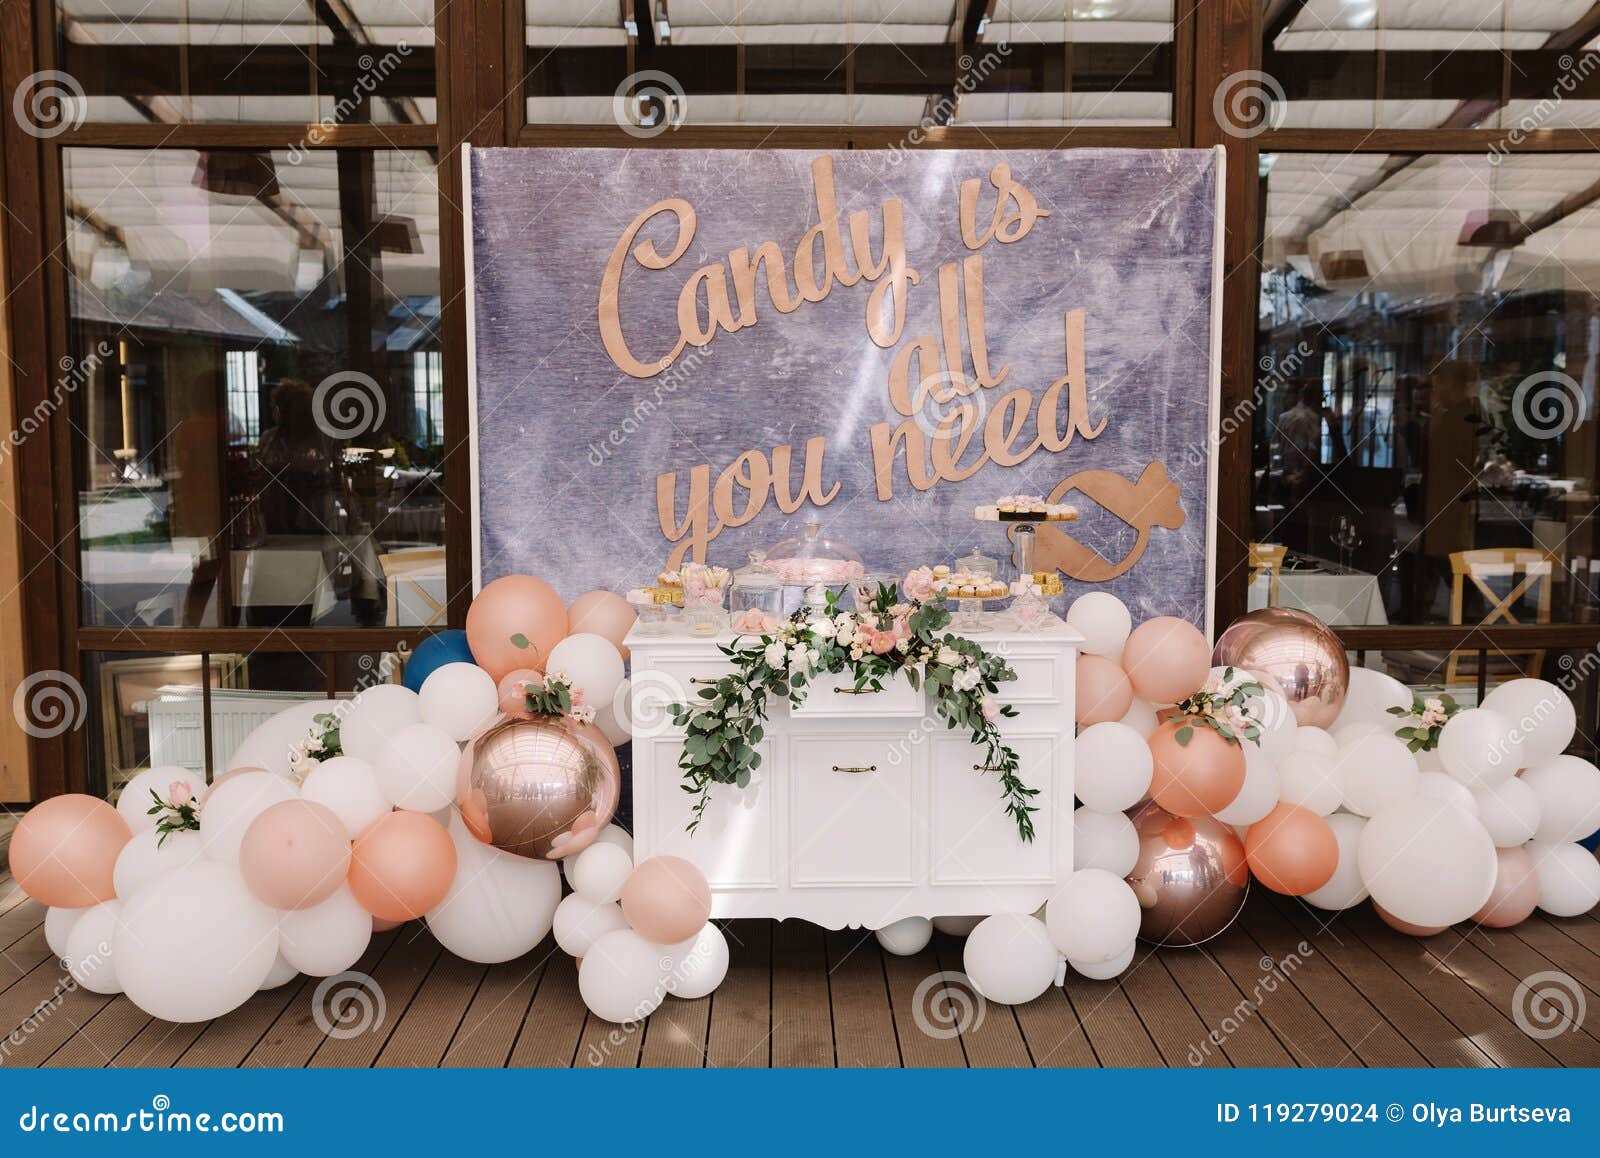 Wedding Candy Bar Decorated With Balloons Stock Photo Image Of